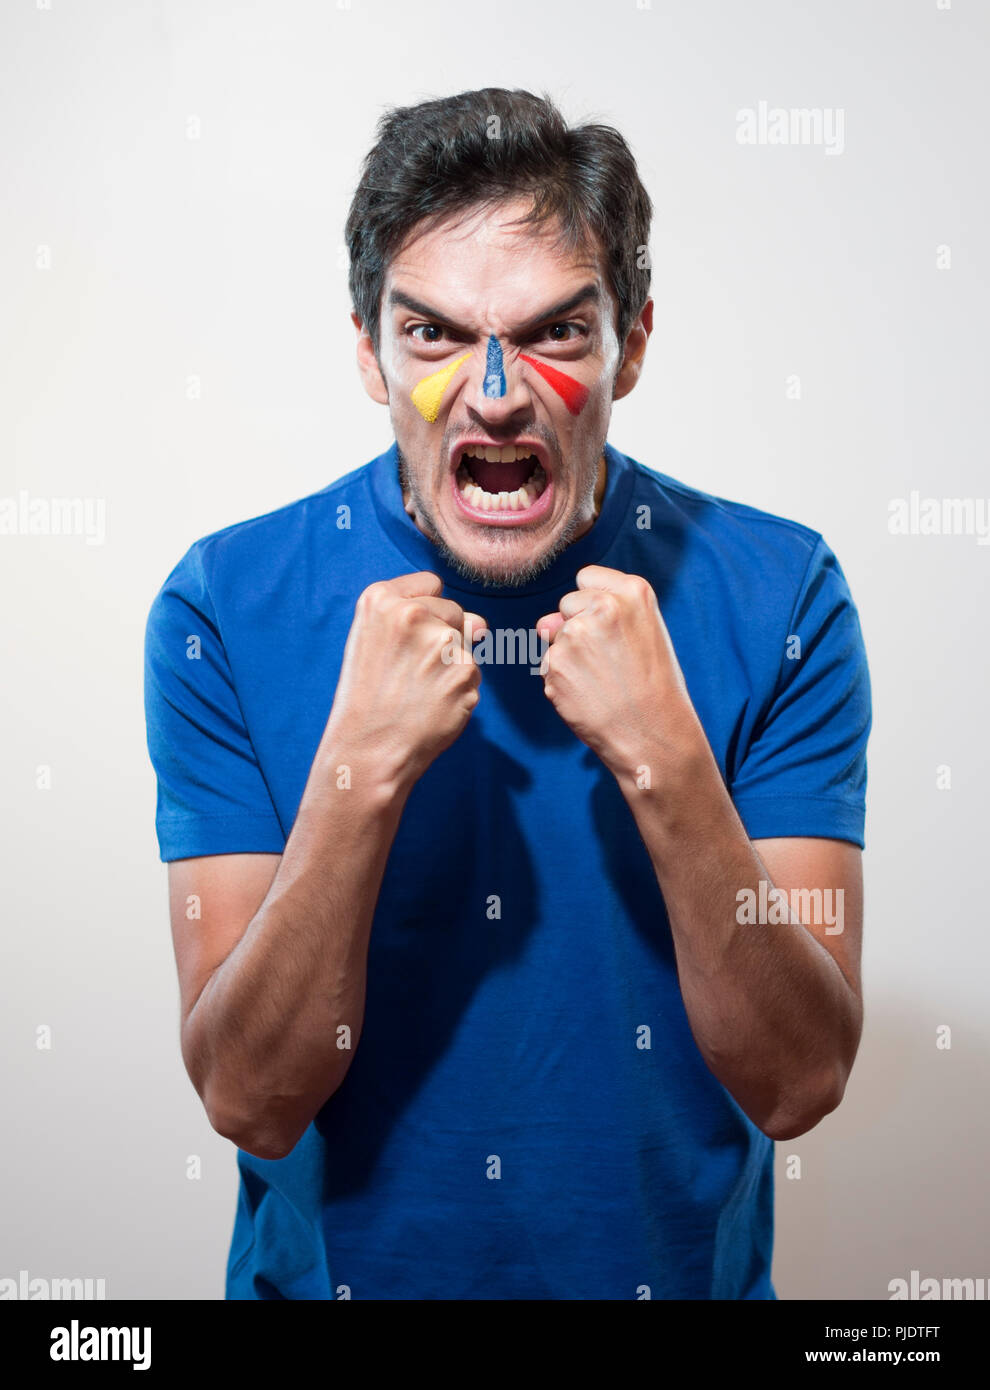 isolted man celebrating goal or victory with his face painted yellow, blue and red Stock Photo